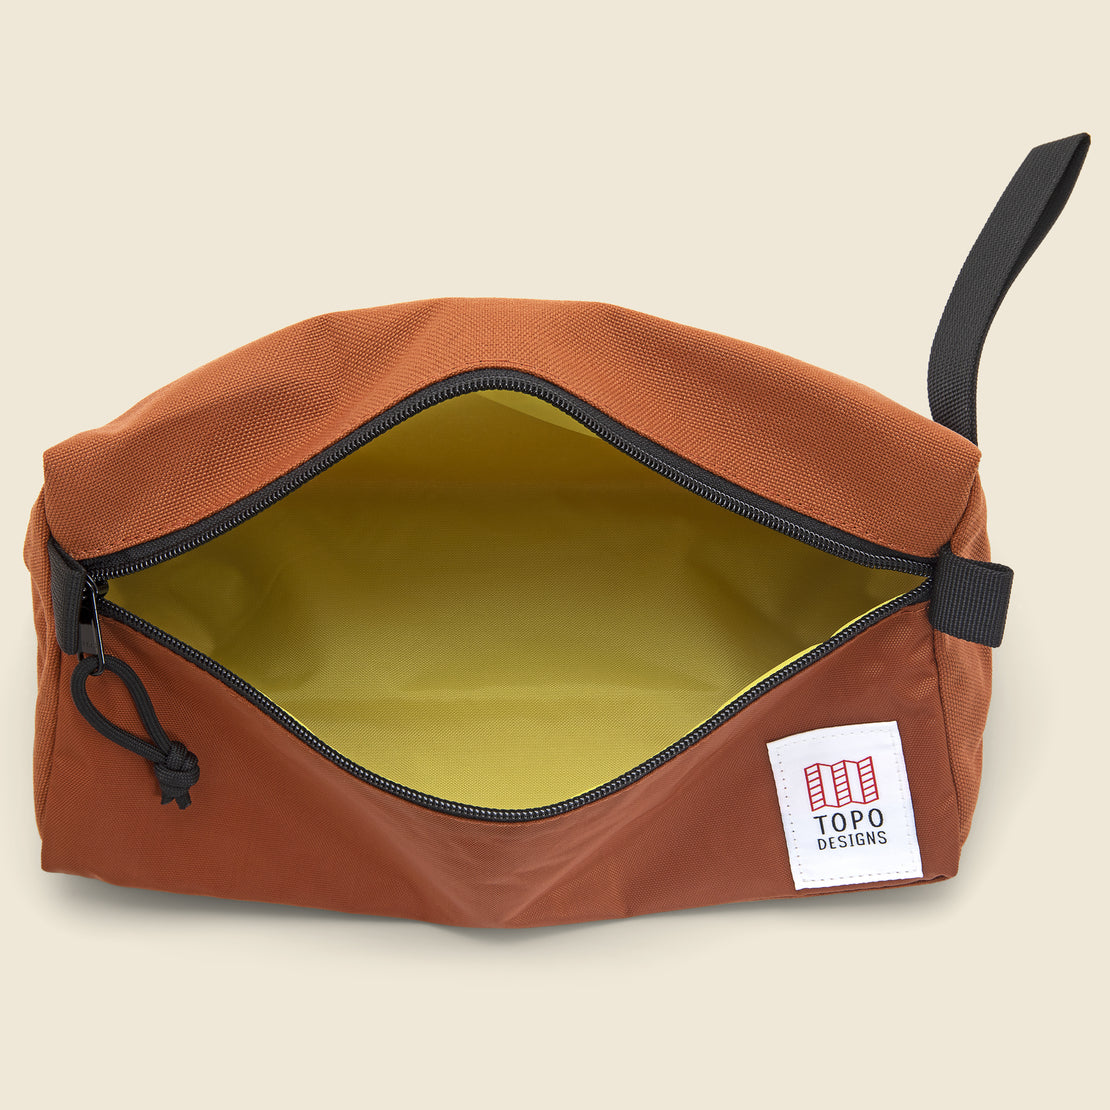 Dopp Kit - Clay - Topo Designs - STAG Provisions - Accessories - Bags / Luggage